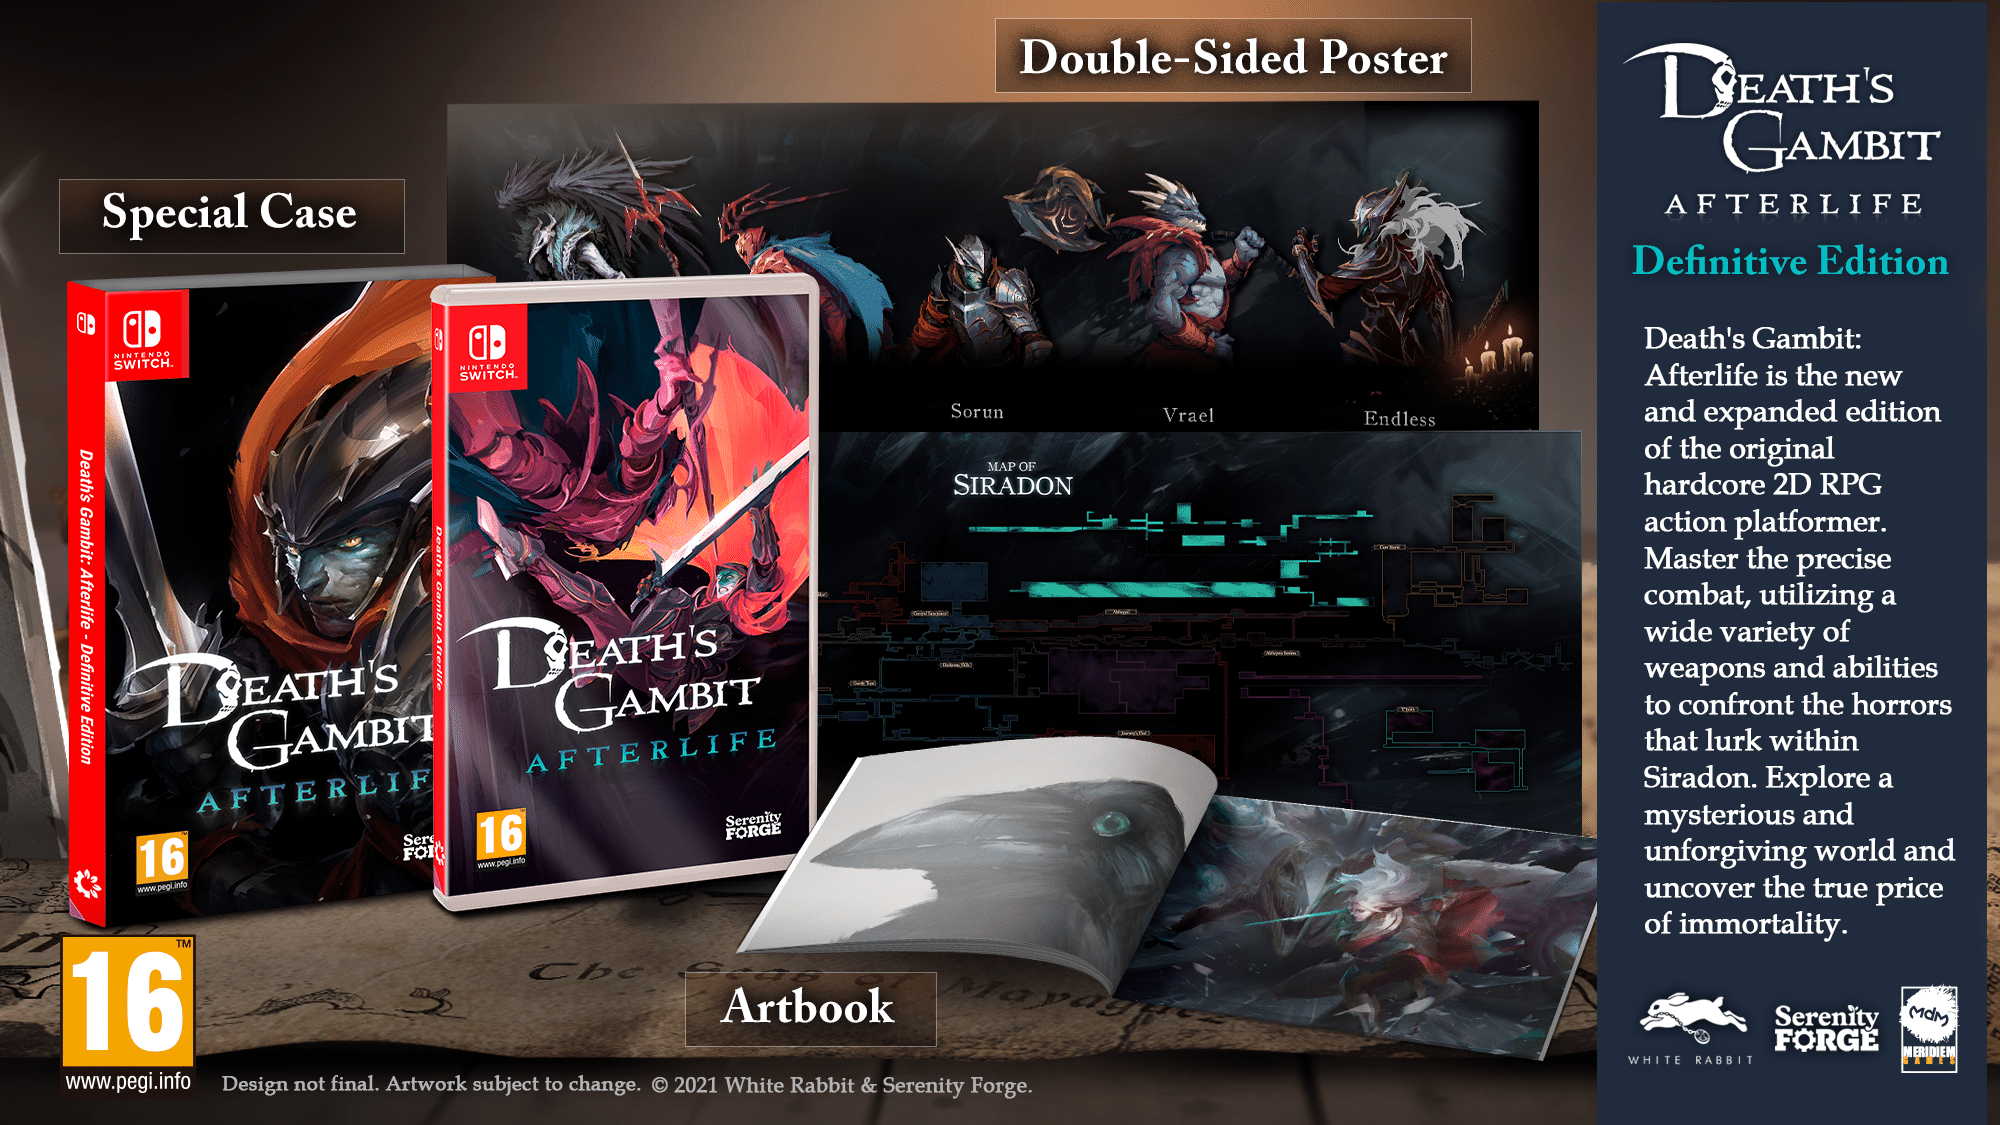 Death's Gambit: Afterlife To Receive Physical Release On Switch